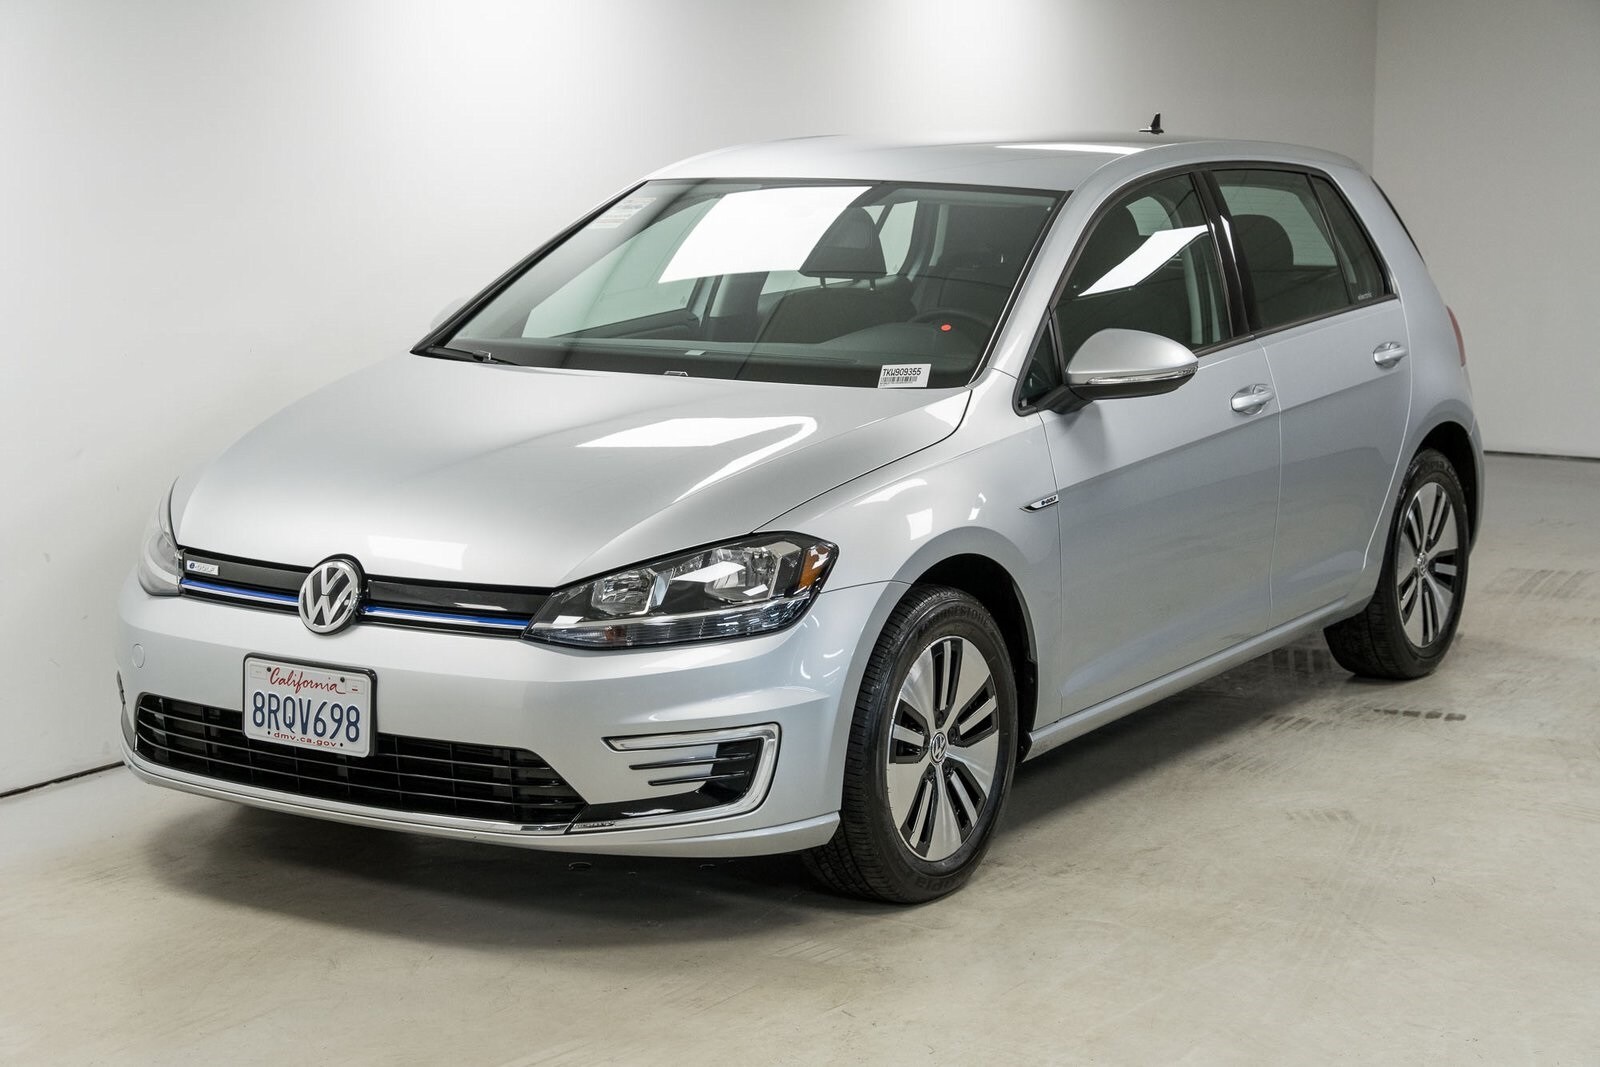 Used 2019 Volkswagen e-Golf e-Golf SE with VIN WVWKR7AUXKW909355 for sale in San Rafael, CA